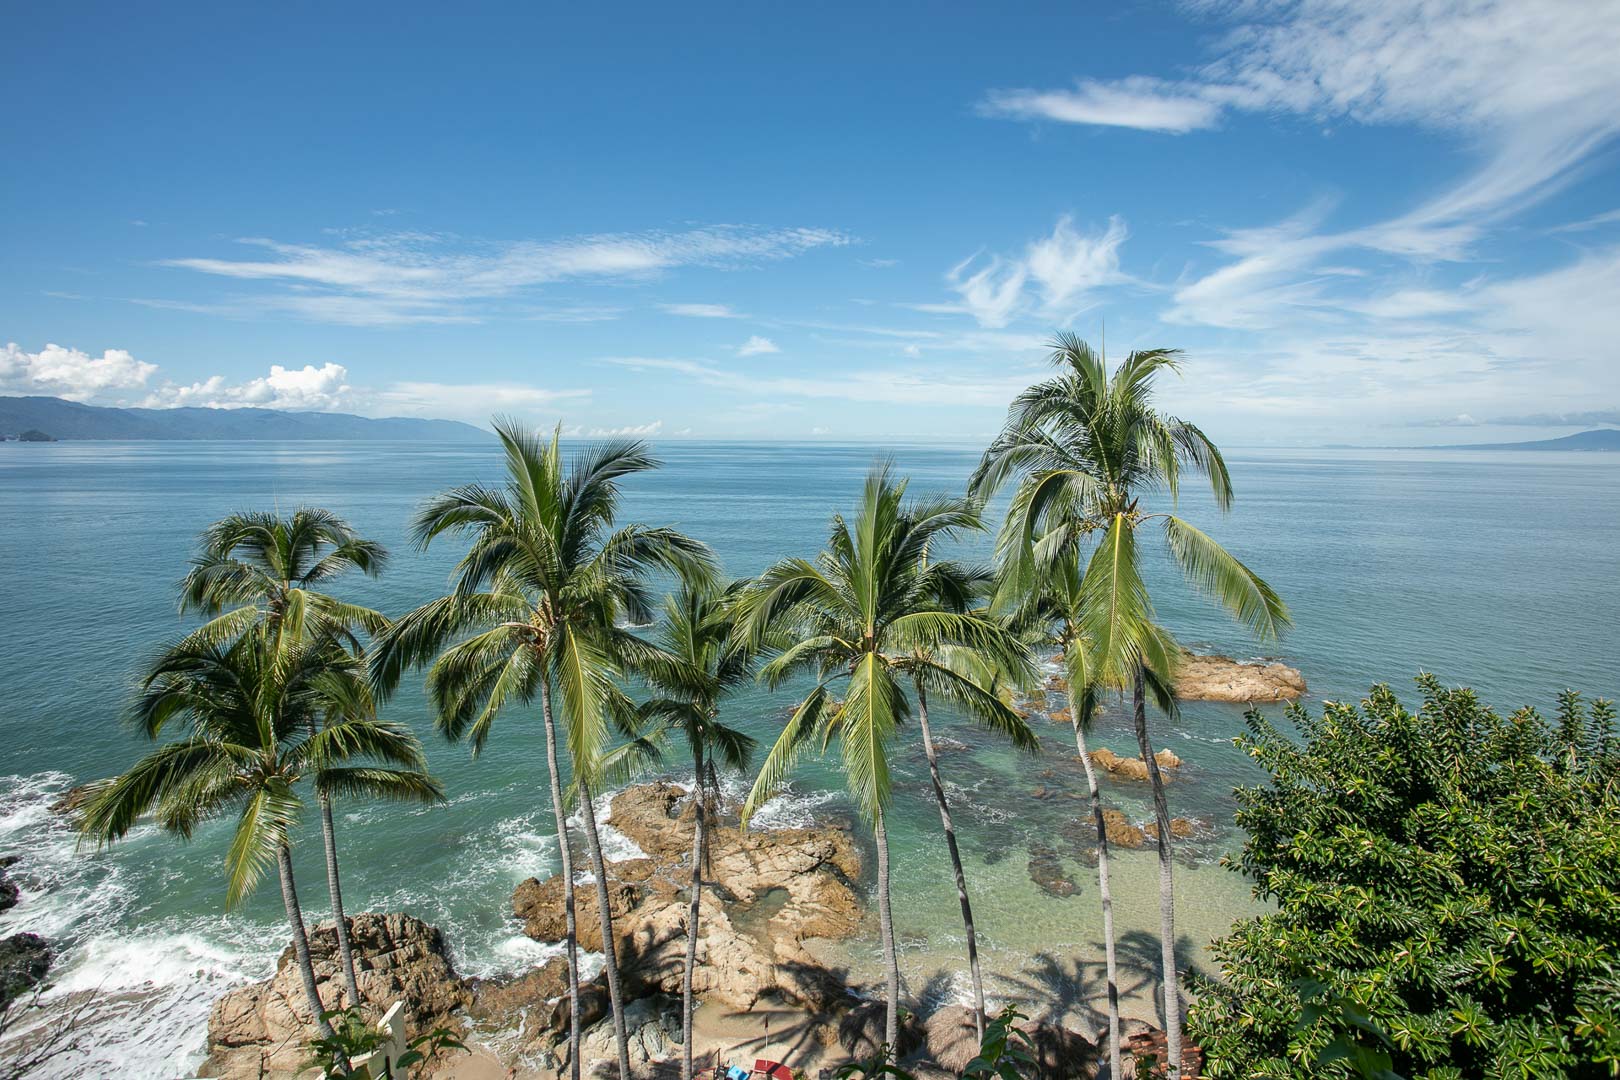 A scenic view of the ocean at TPI's Lindo Mar Resort in Puerto Vallarta, Mexico.